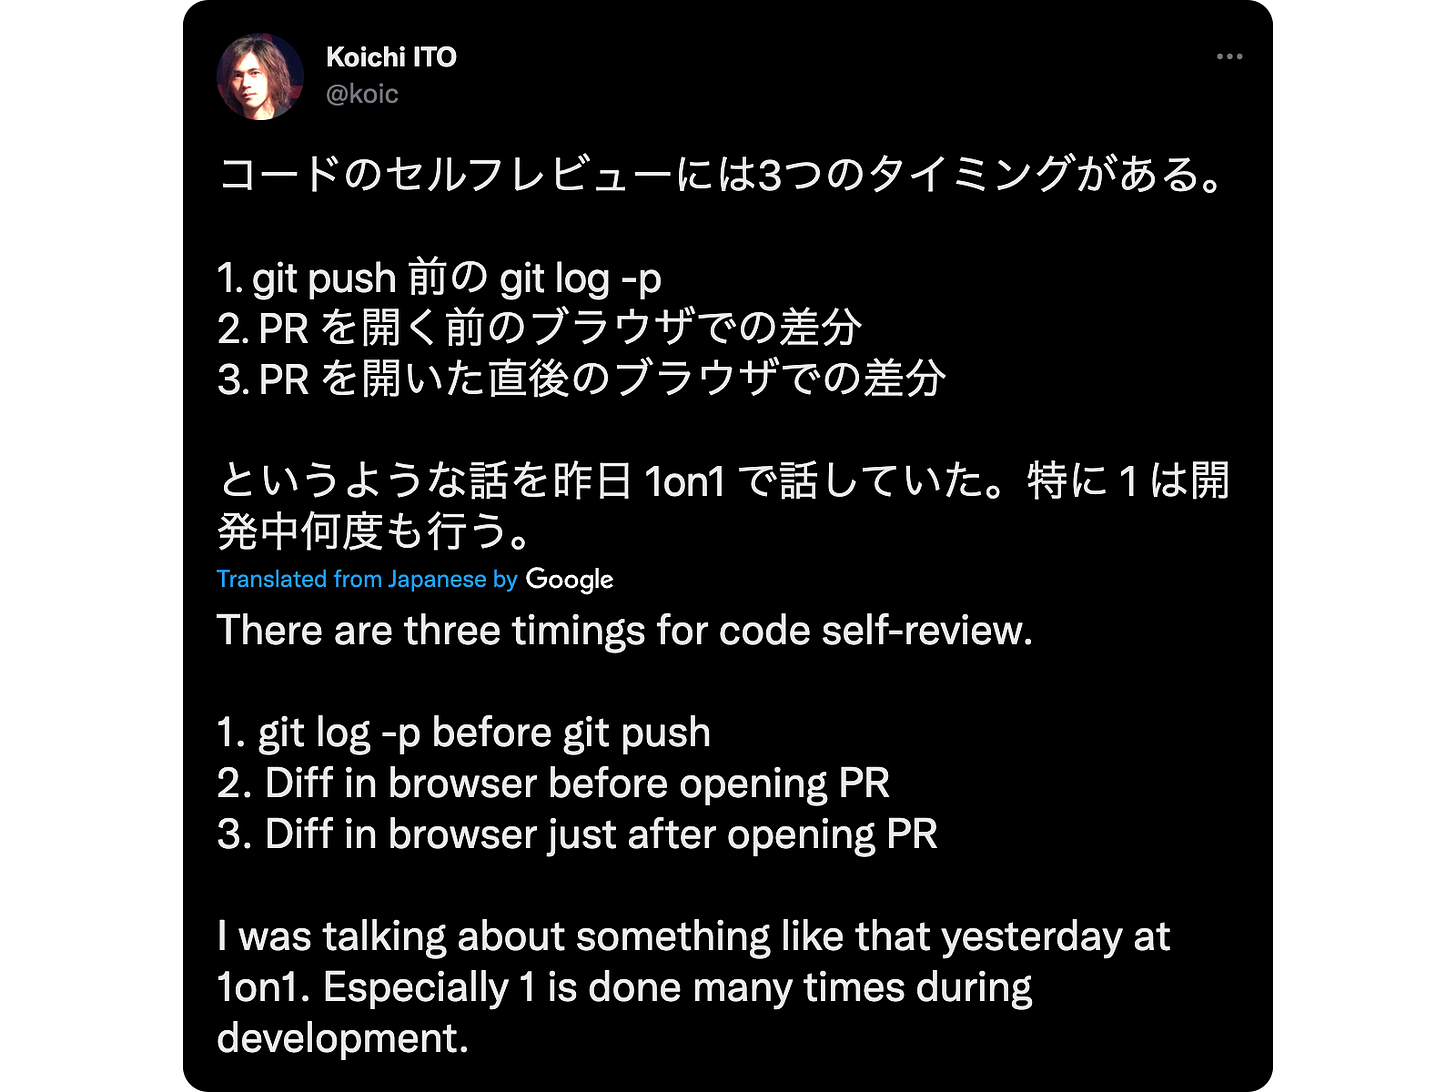 There are three timings for code self-review.  1. git log -p before git push 2. Diff in browser before opening PR 3. Diff in browser just after opening PR  I was talking about something like that yesterday at 1on1. Especially 1 is done many times during development.